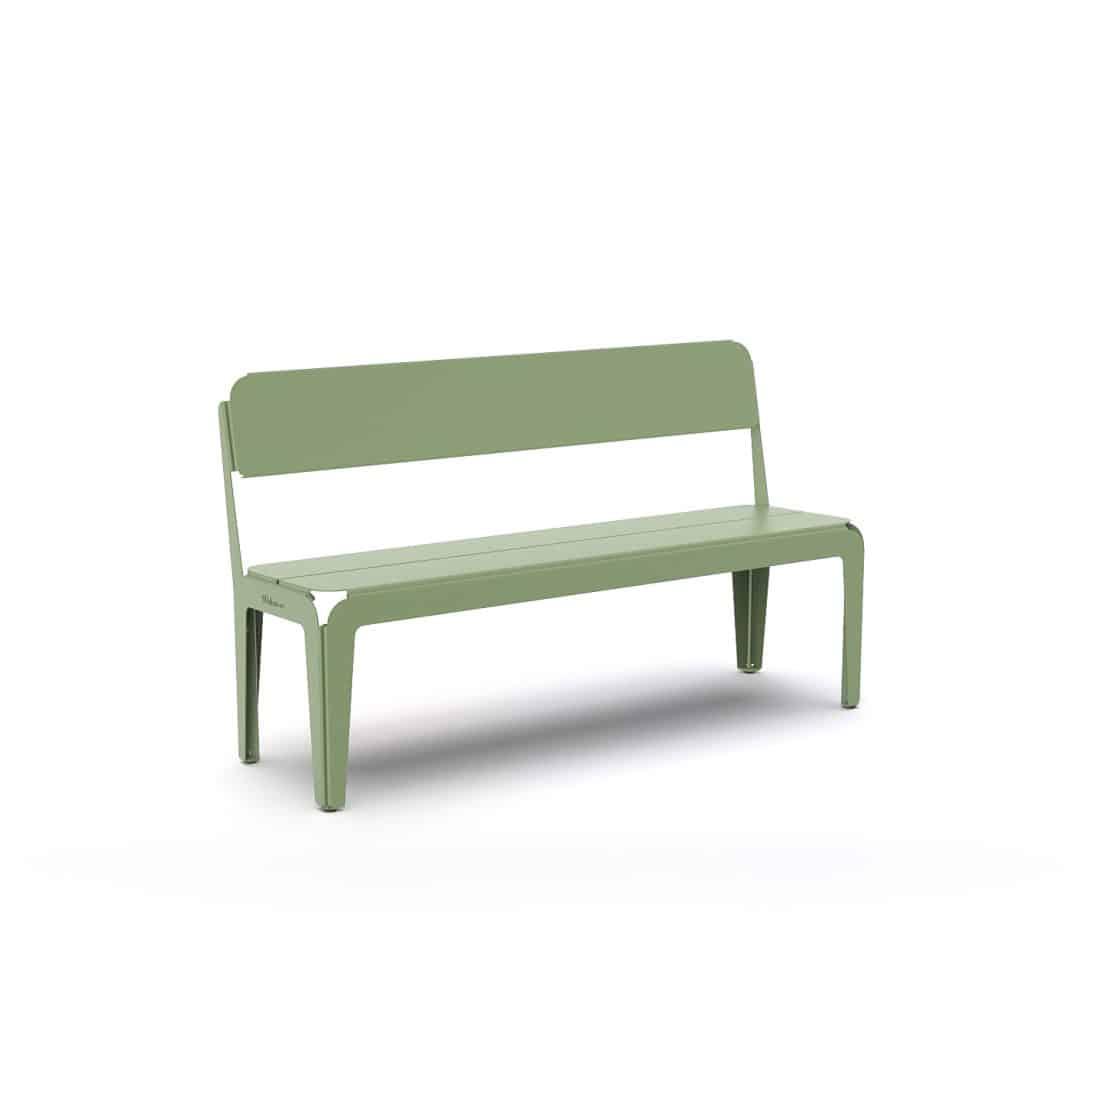 Bended Bench With Backrest Pale Green